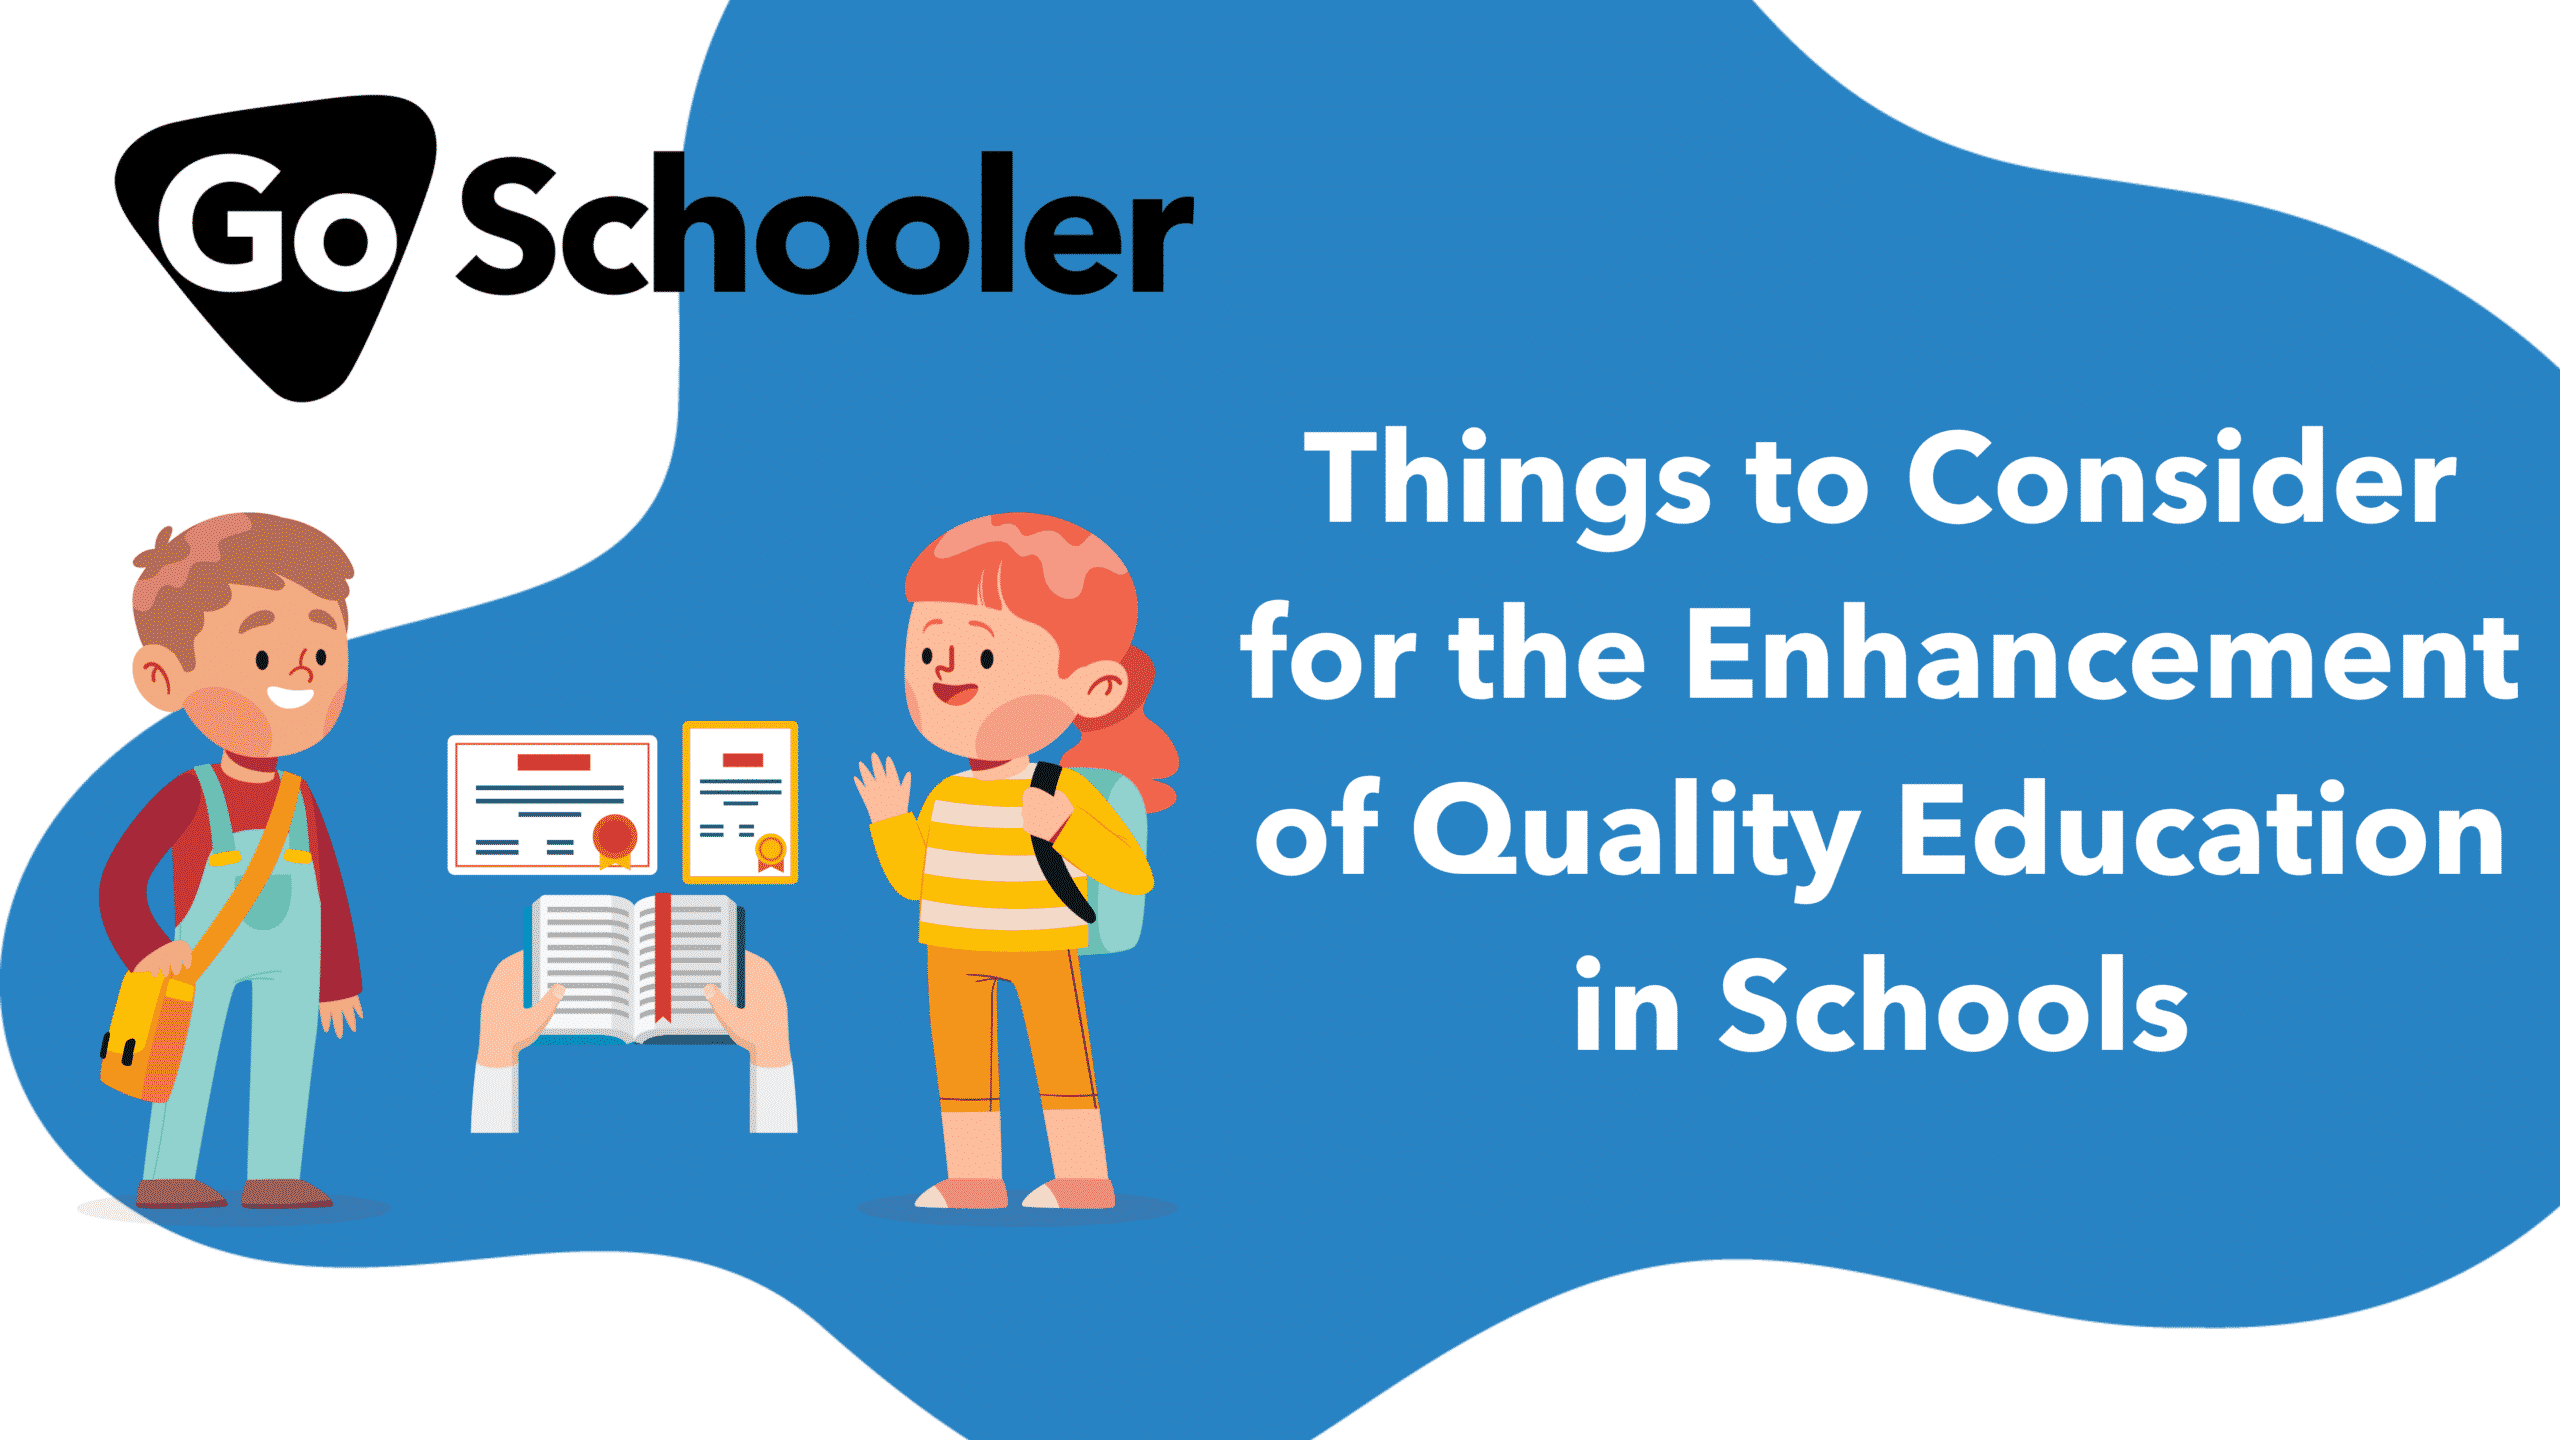 Enhancement of Quality Education in Schools